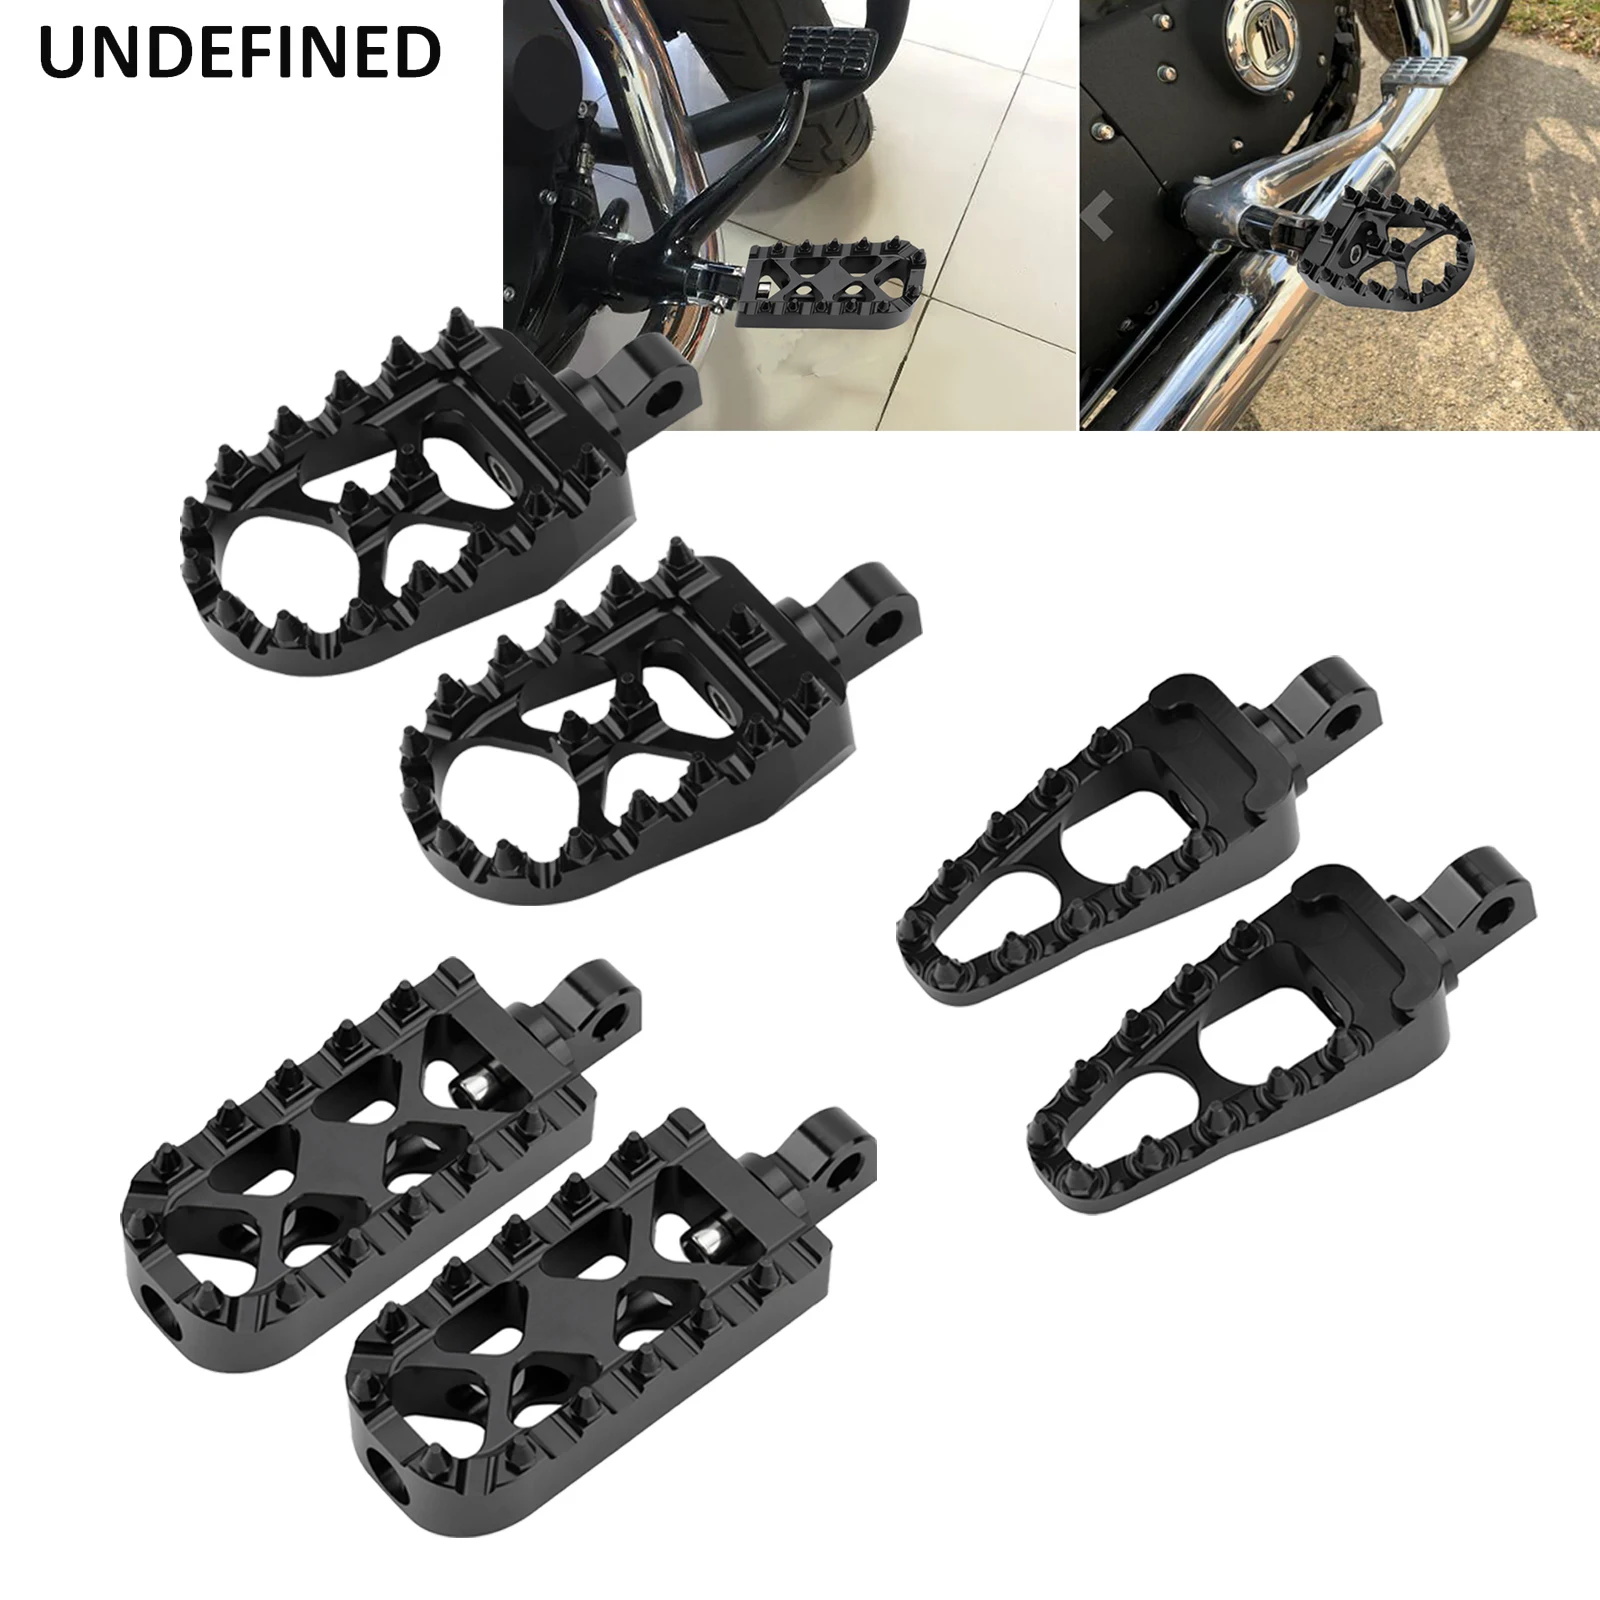 

Motorcycle Foot Pegs Rest Pedals MX Offroad Footrests Black For Harley Dyna Sportster XL 883 Wide Glide Fat Boy Bobber Chopper